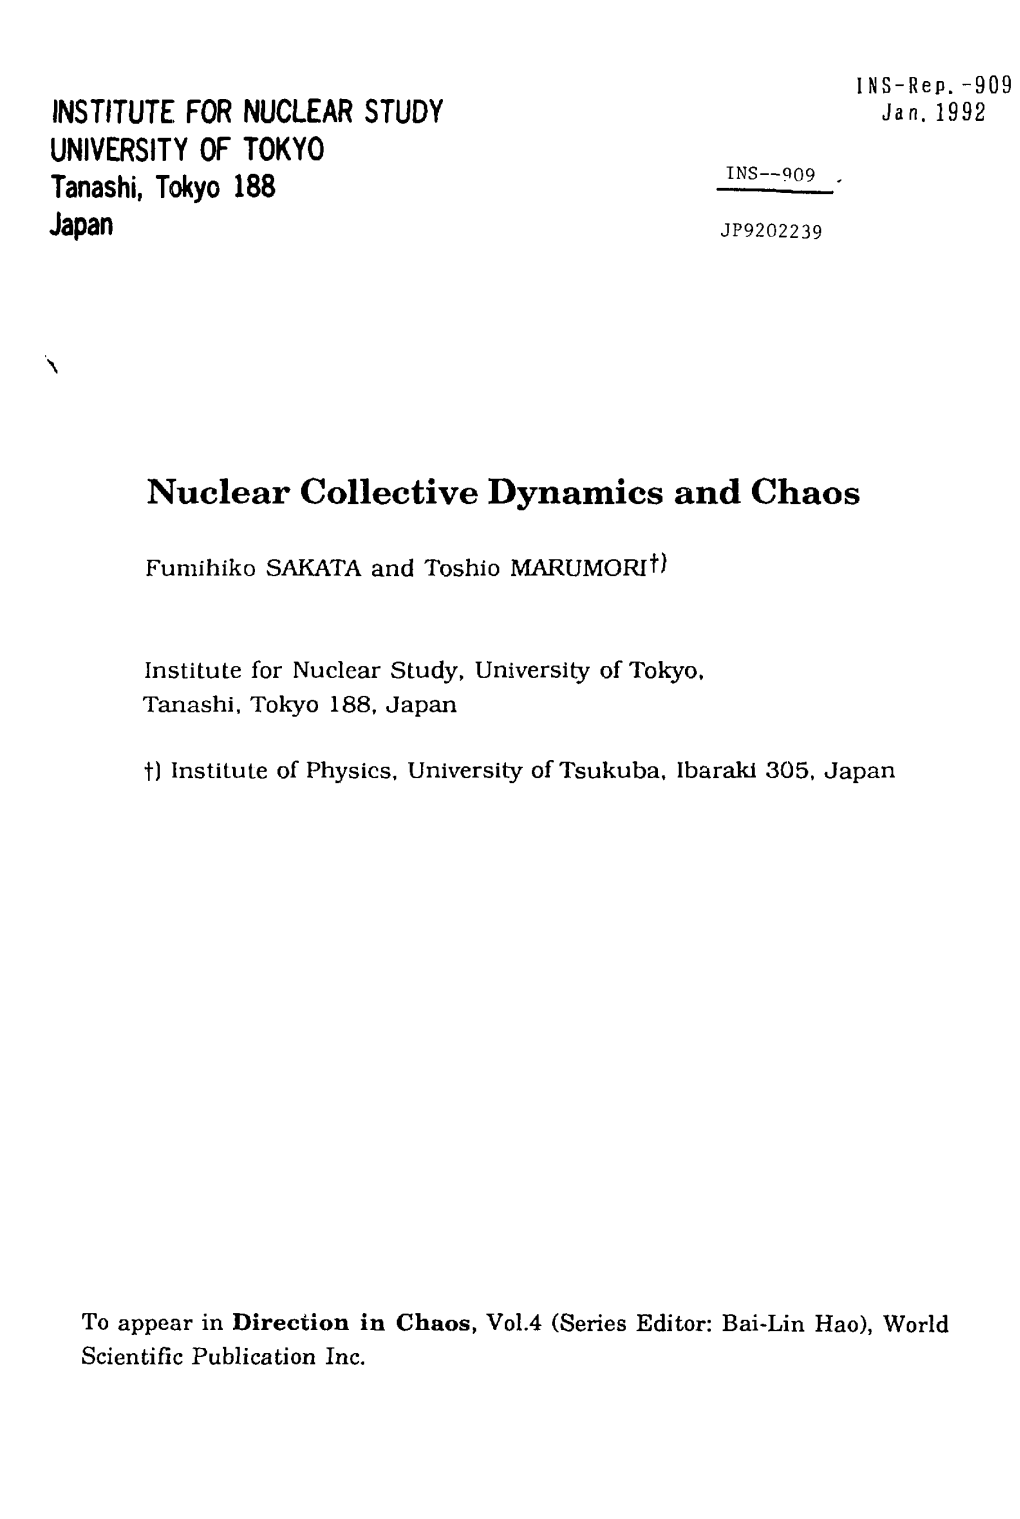 Nuclear Collective Dynamics and Chaos